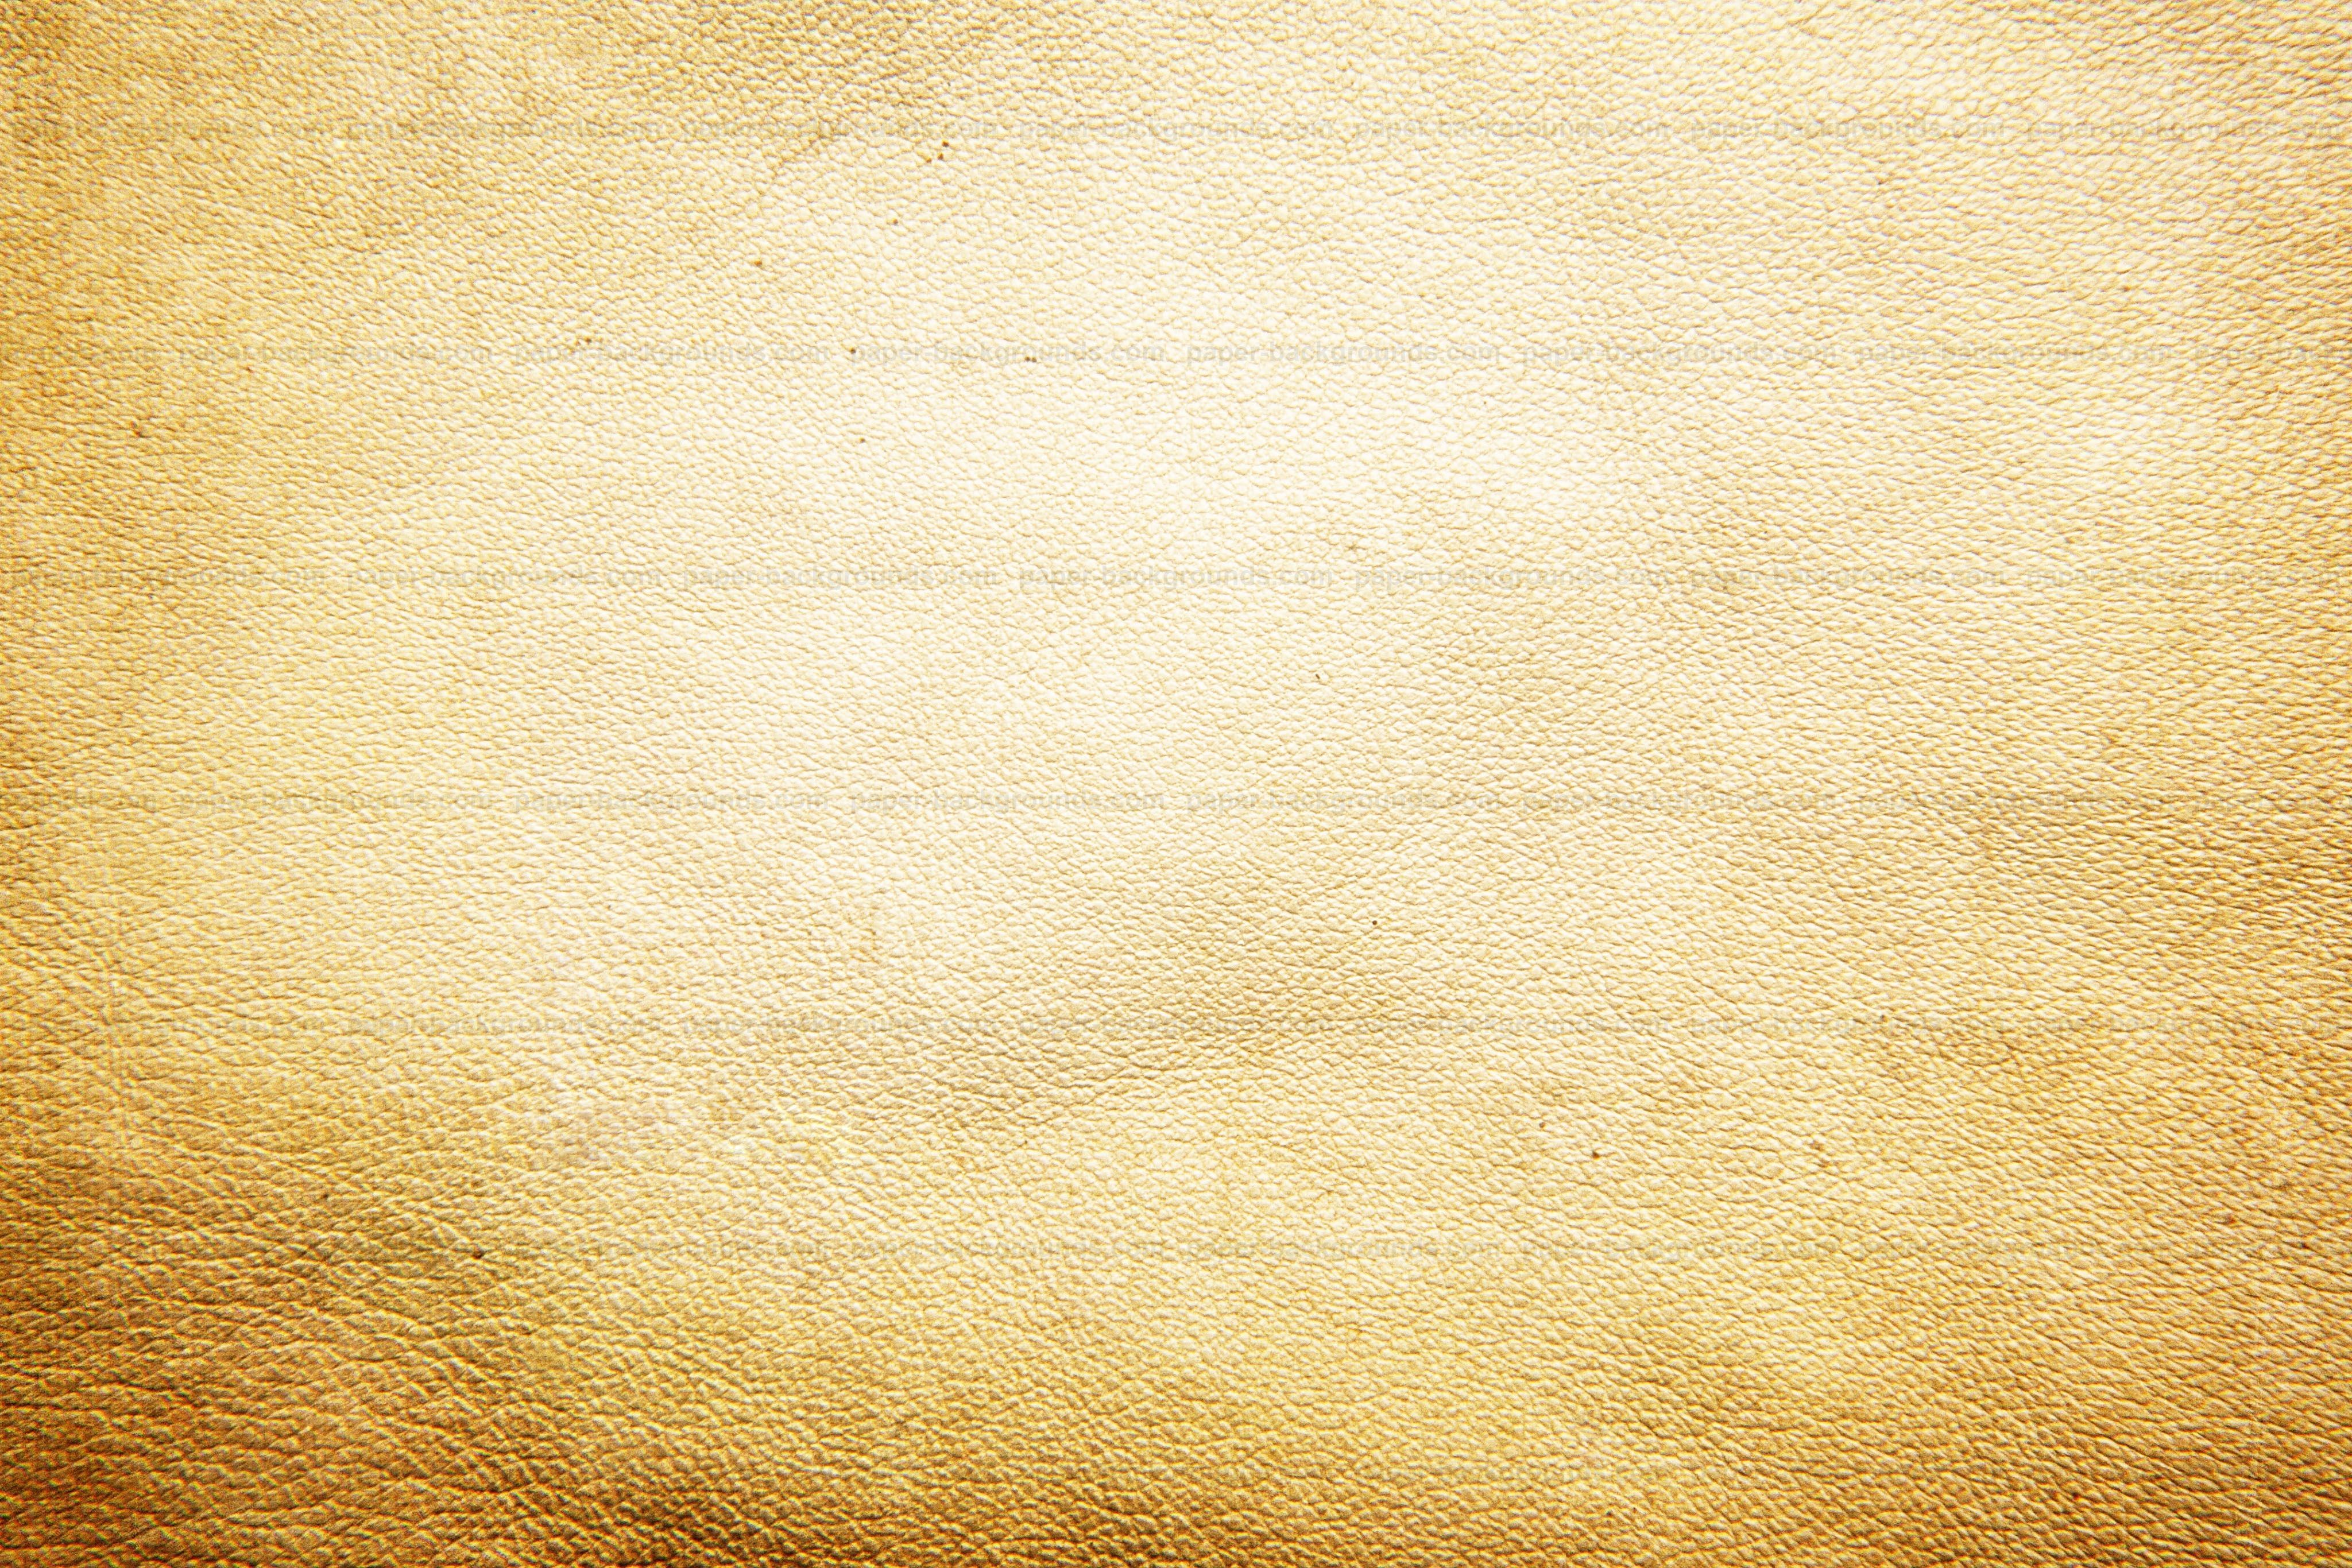 Grunge-Leather-Background-Texture « Paper Backgrounds | Cuzimage